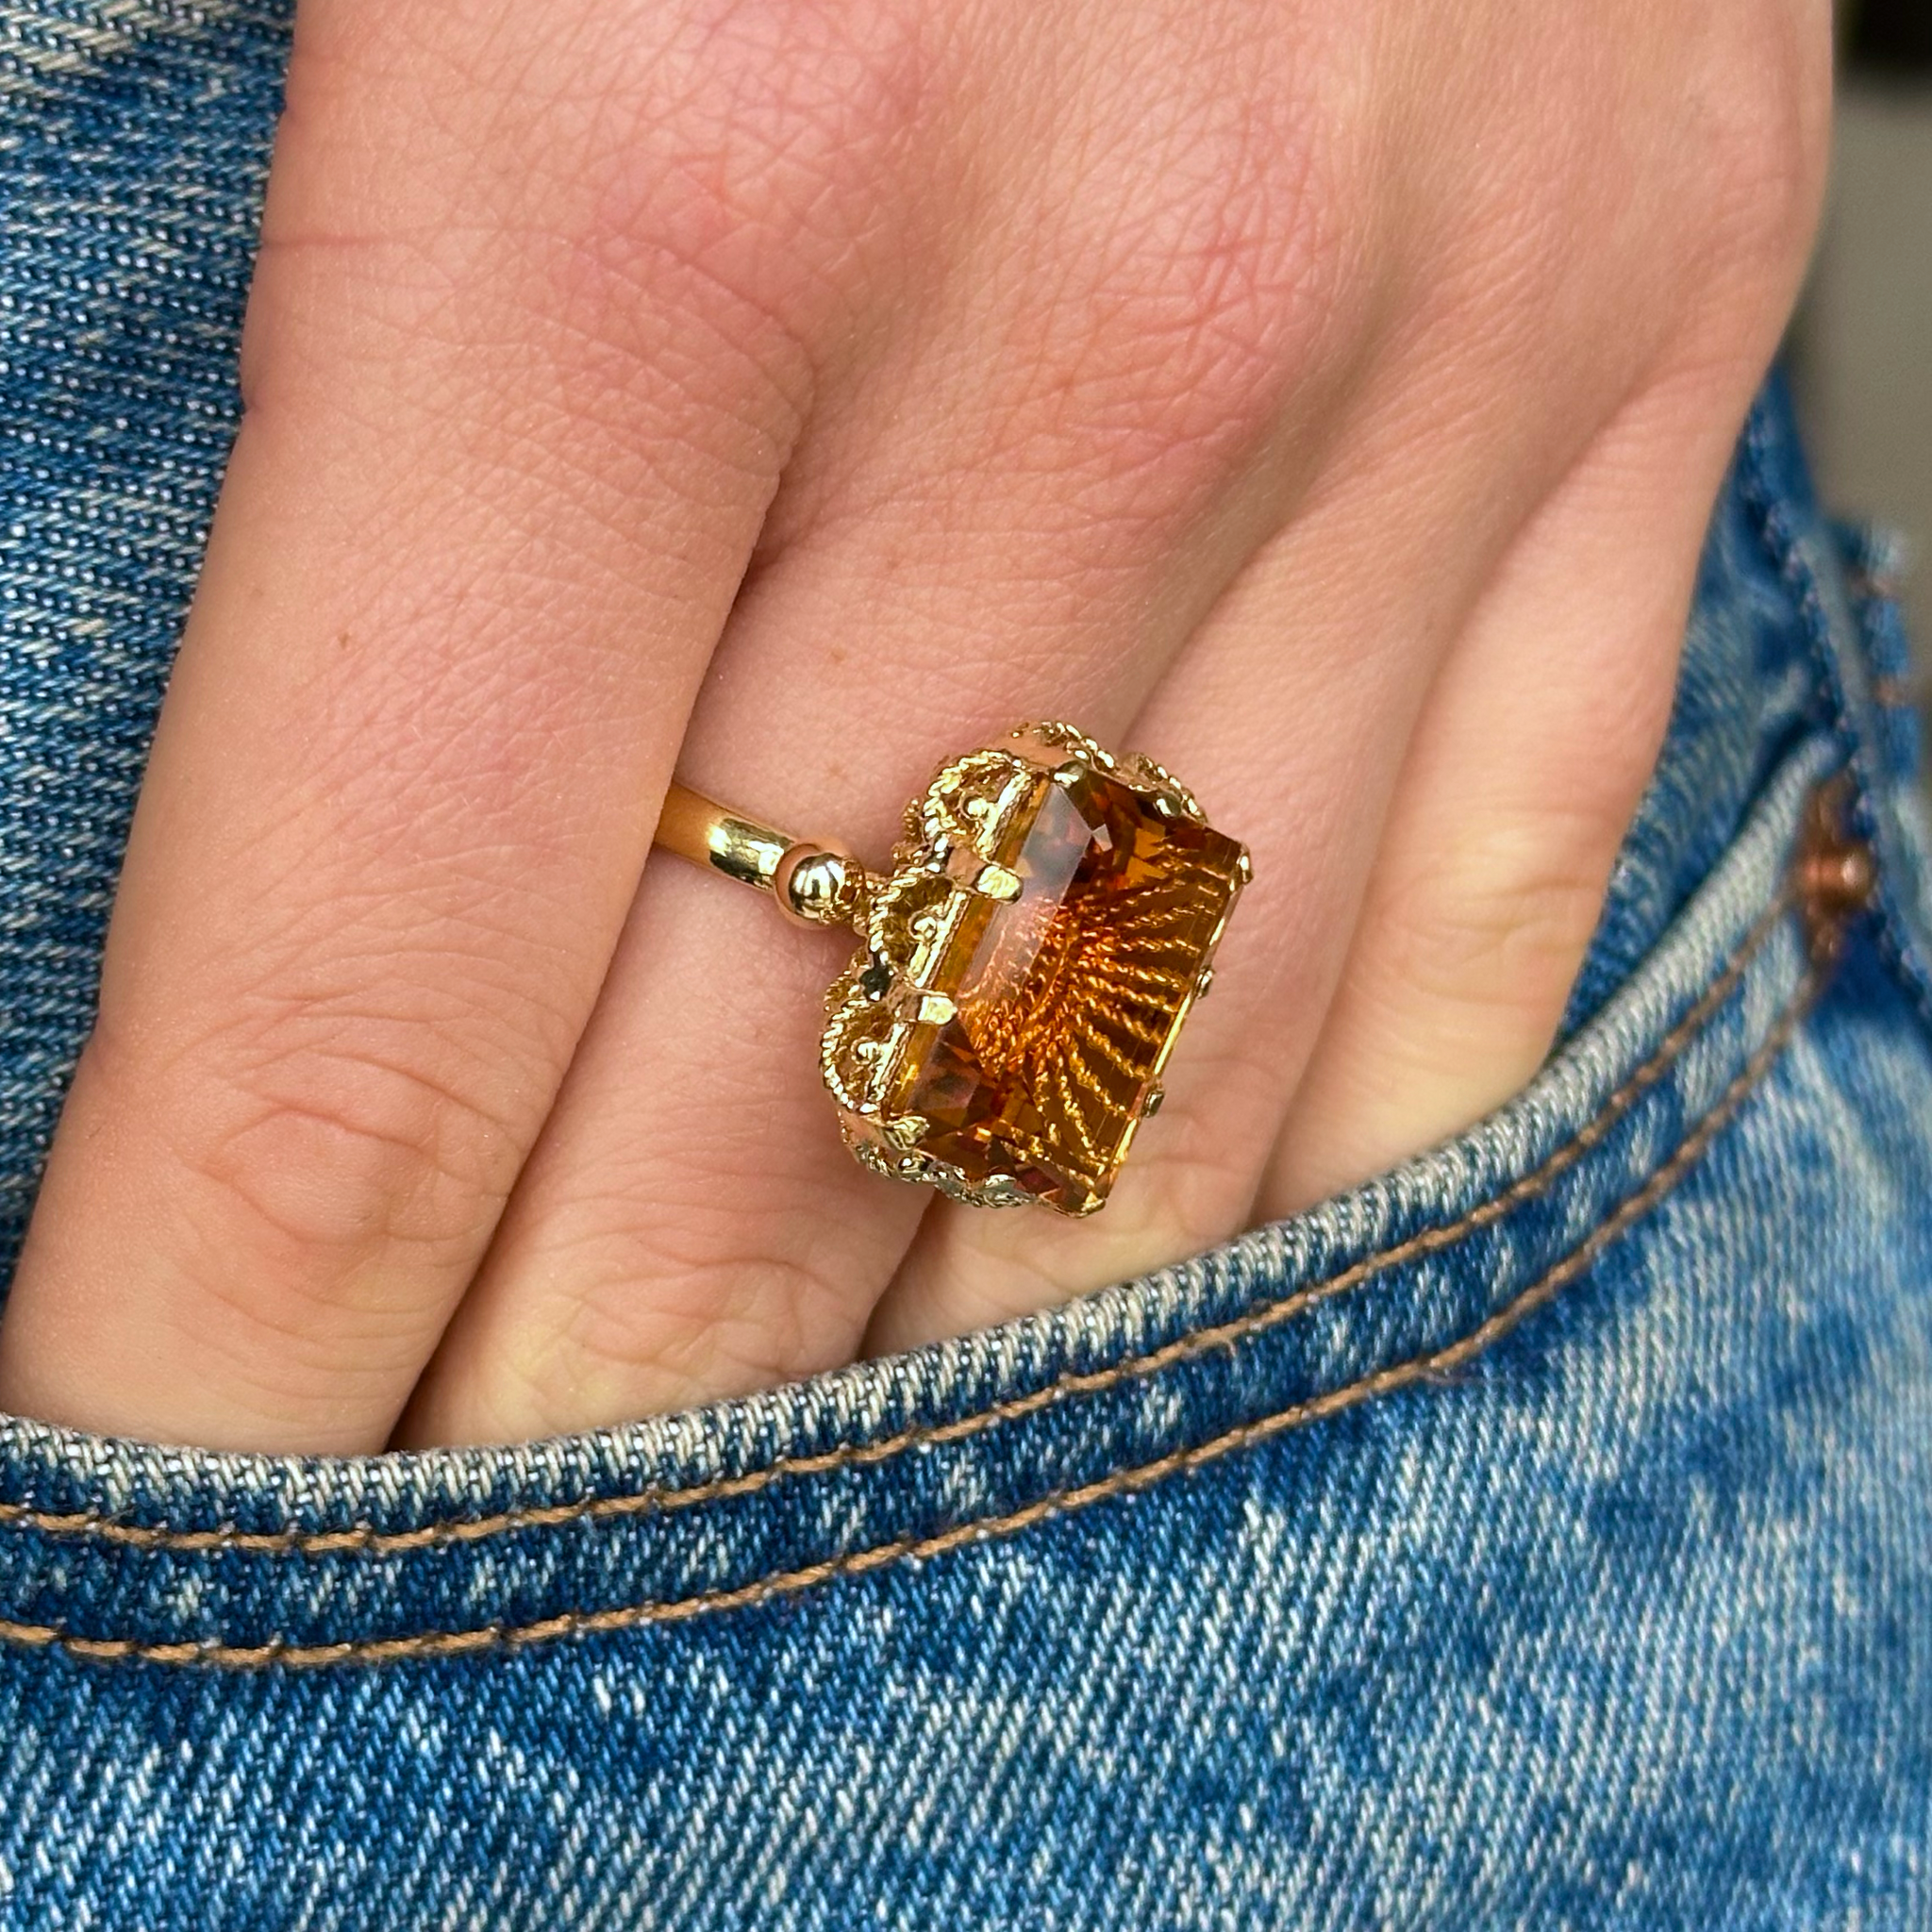 Antique, 1880s Citrine Ring with Rope Metal Work, worn on hand in pocket of jeans.